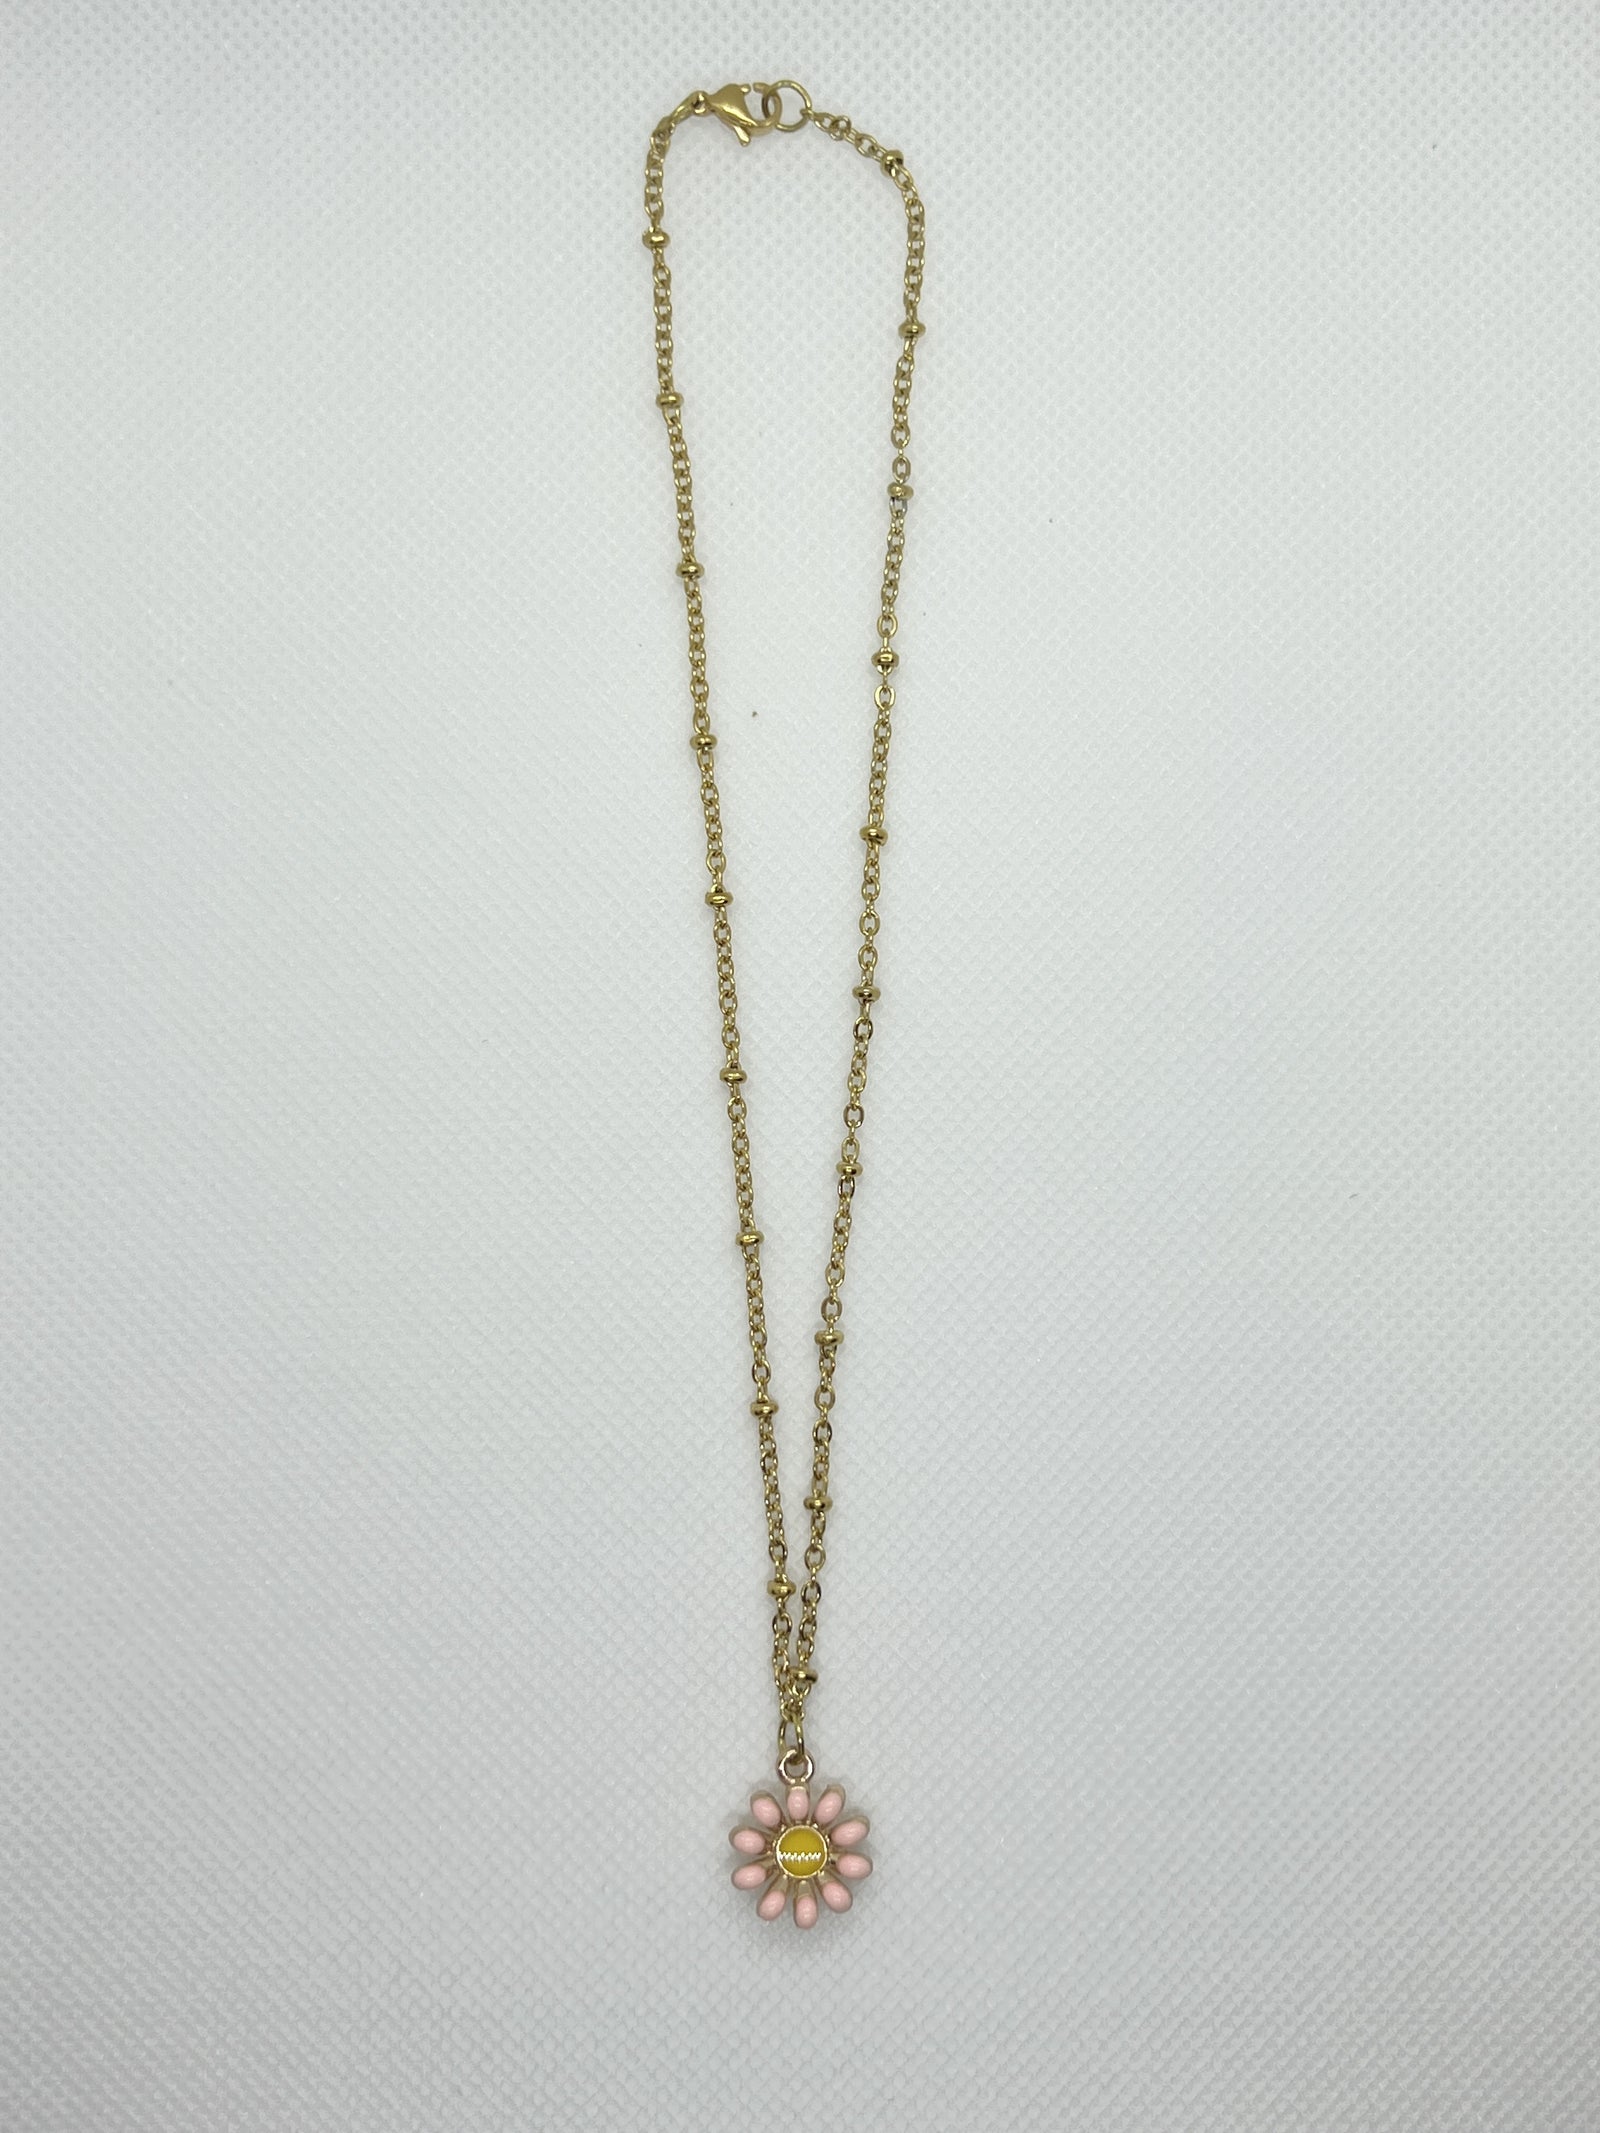 Daisy Necklace - Pink